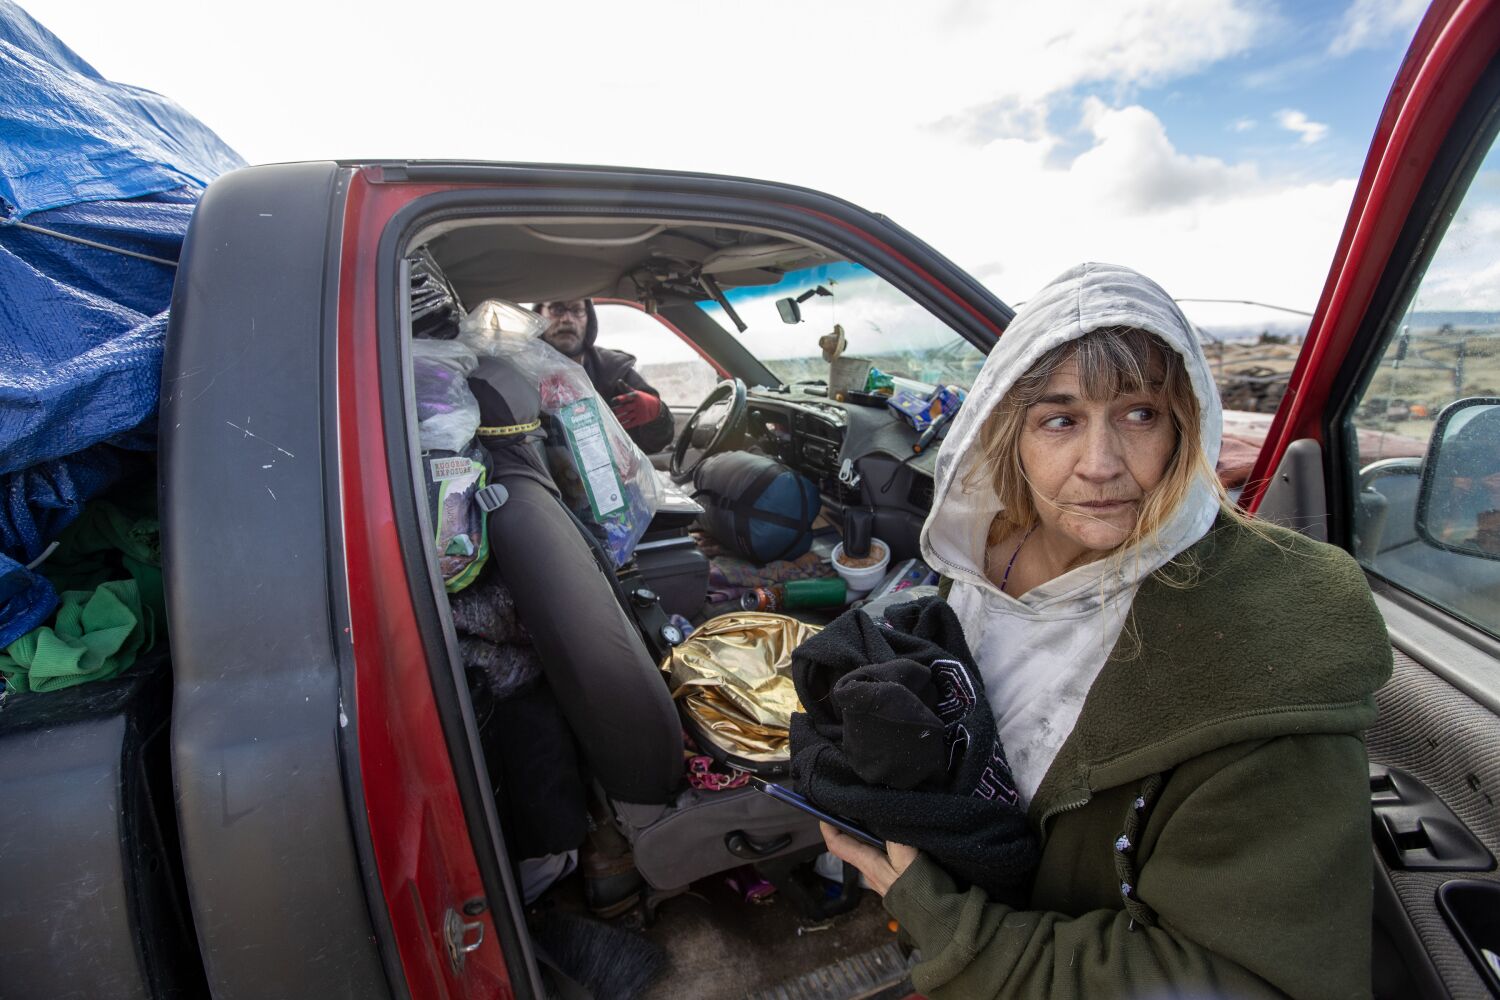 Southern California races to shelter homeless people as frigid storm bears down